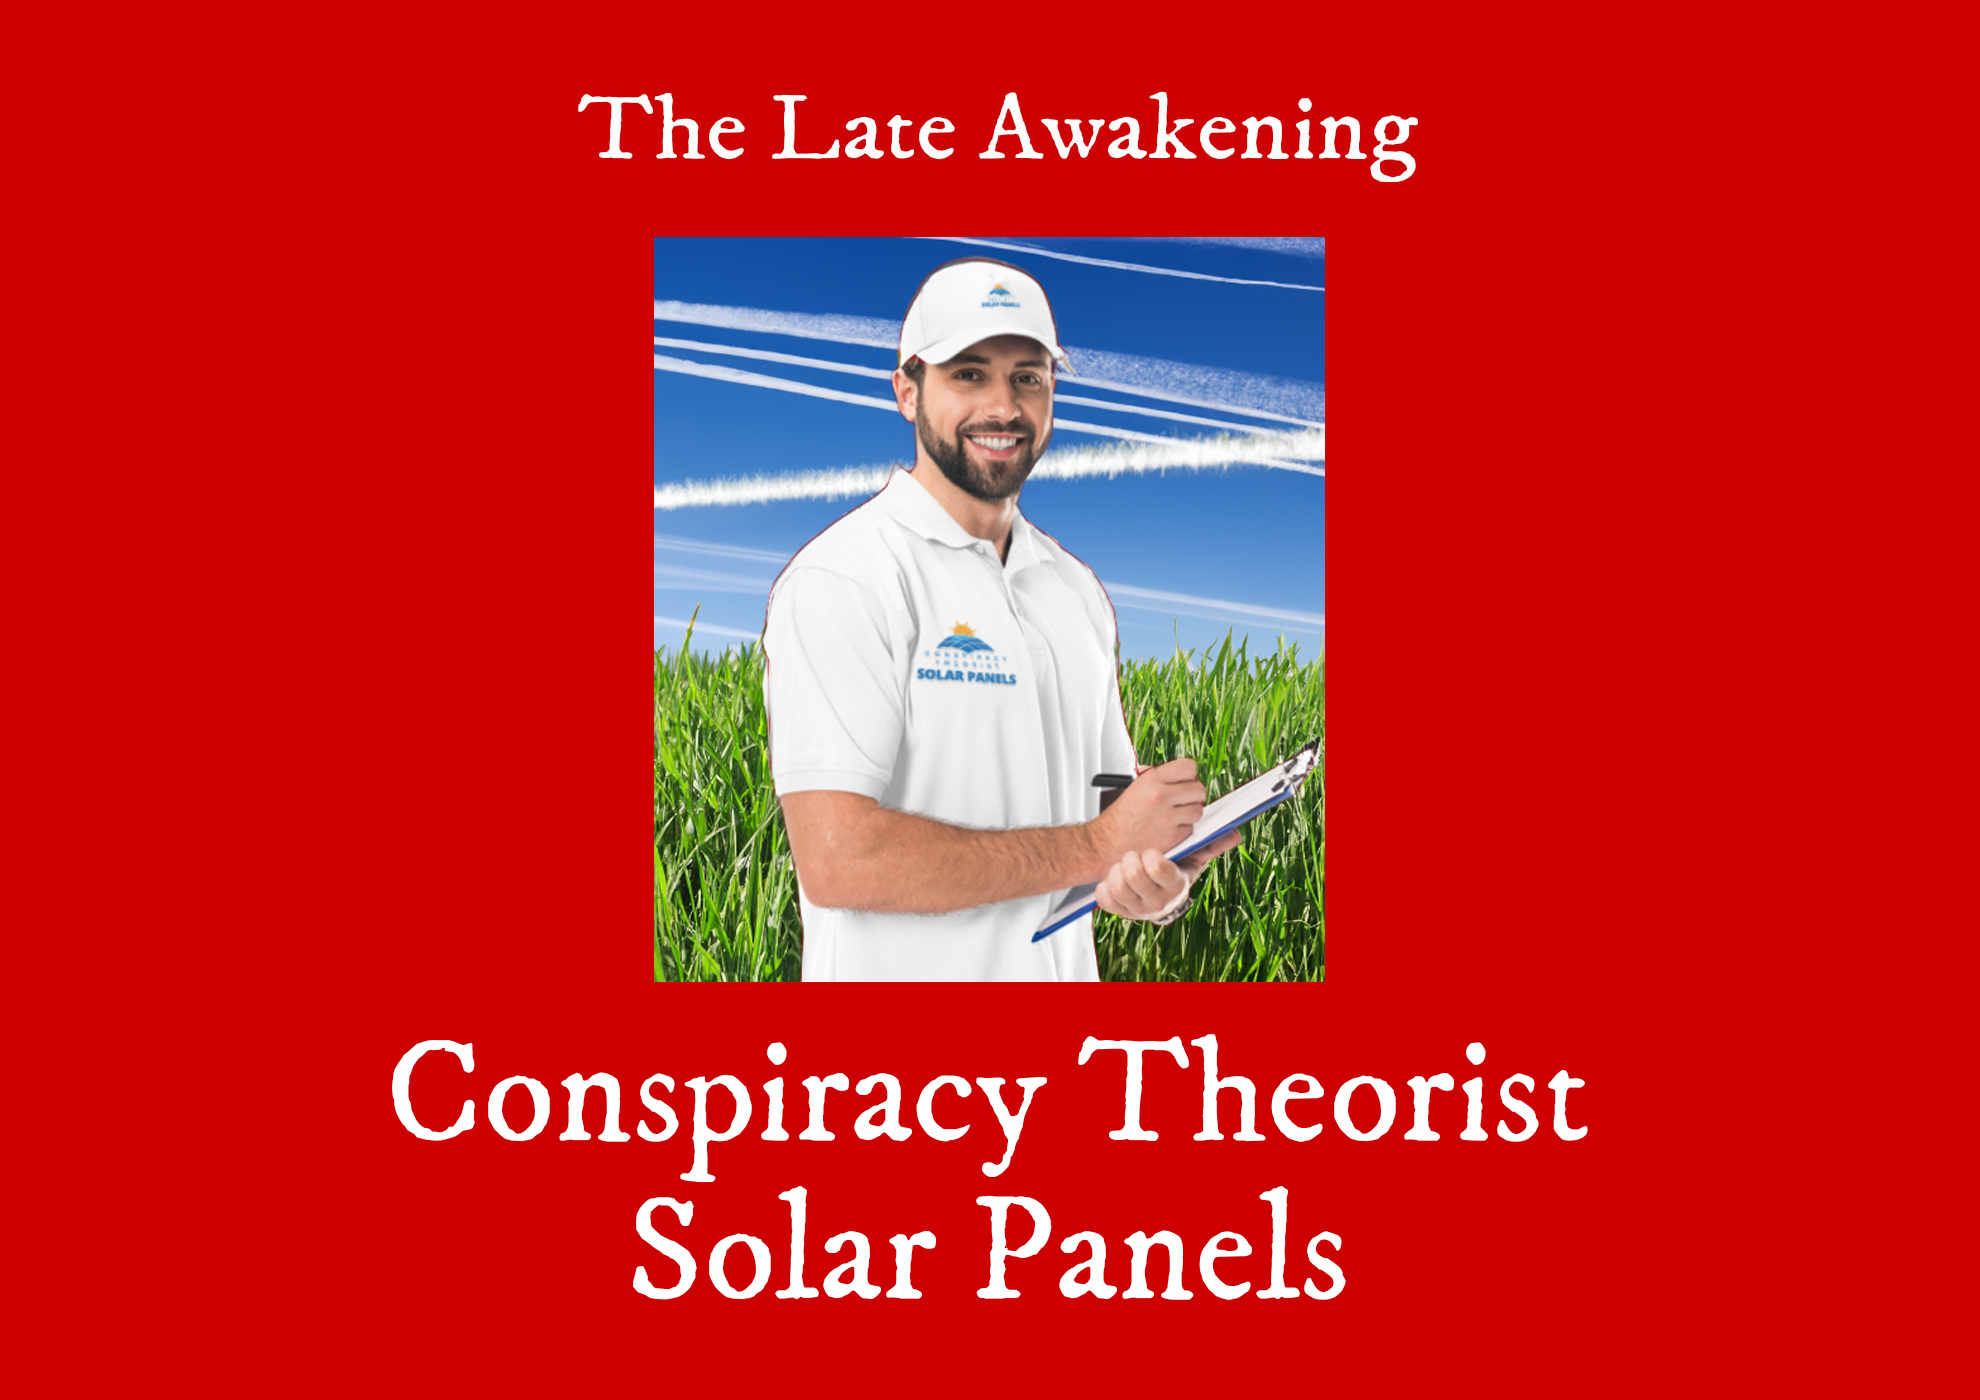 Solar panel salesman holding clipboard in front of chemtrails in the sky